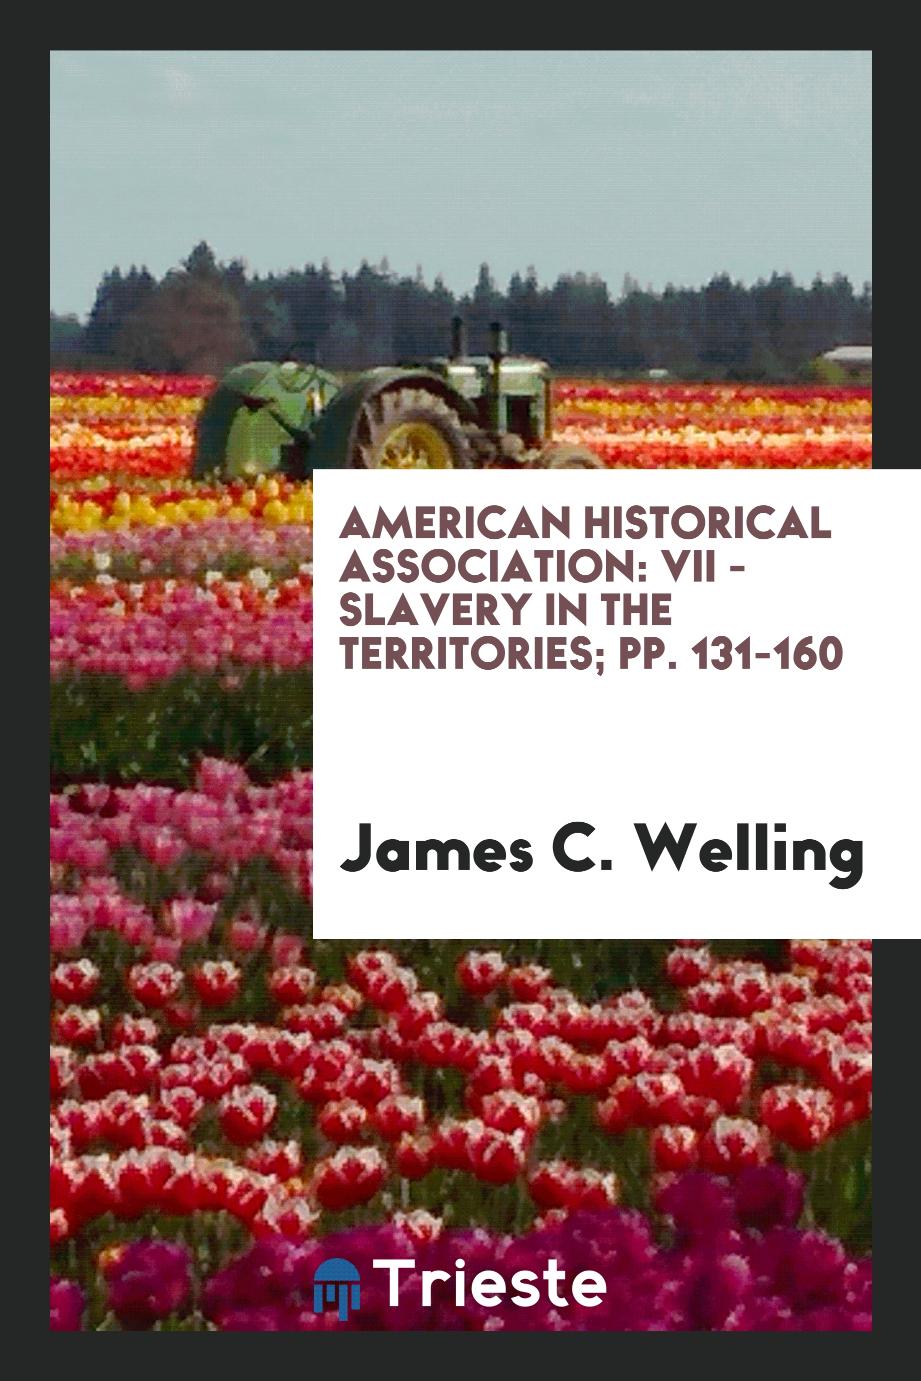 American Historical Association: VII - Slavery in the Territories; pp. 131-160